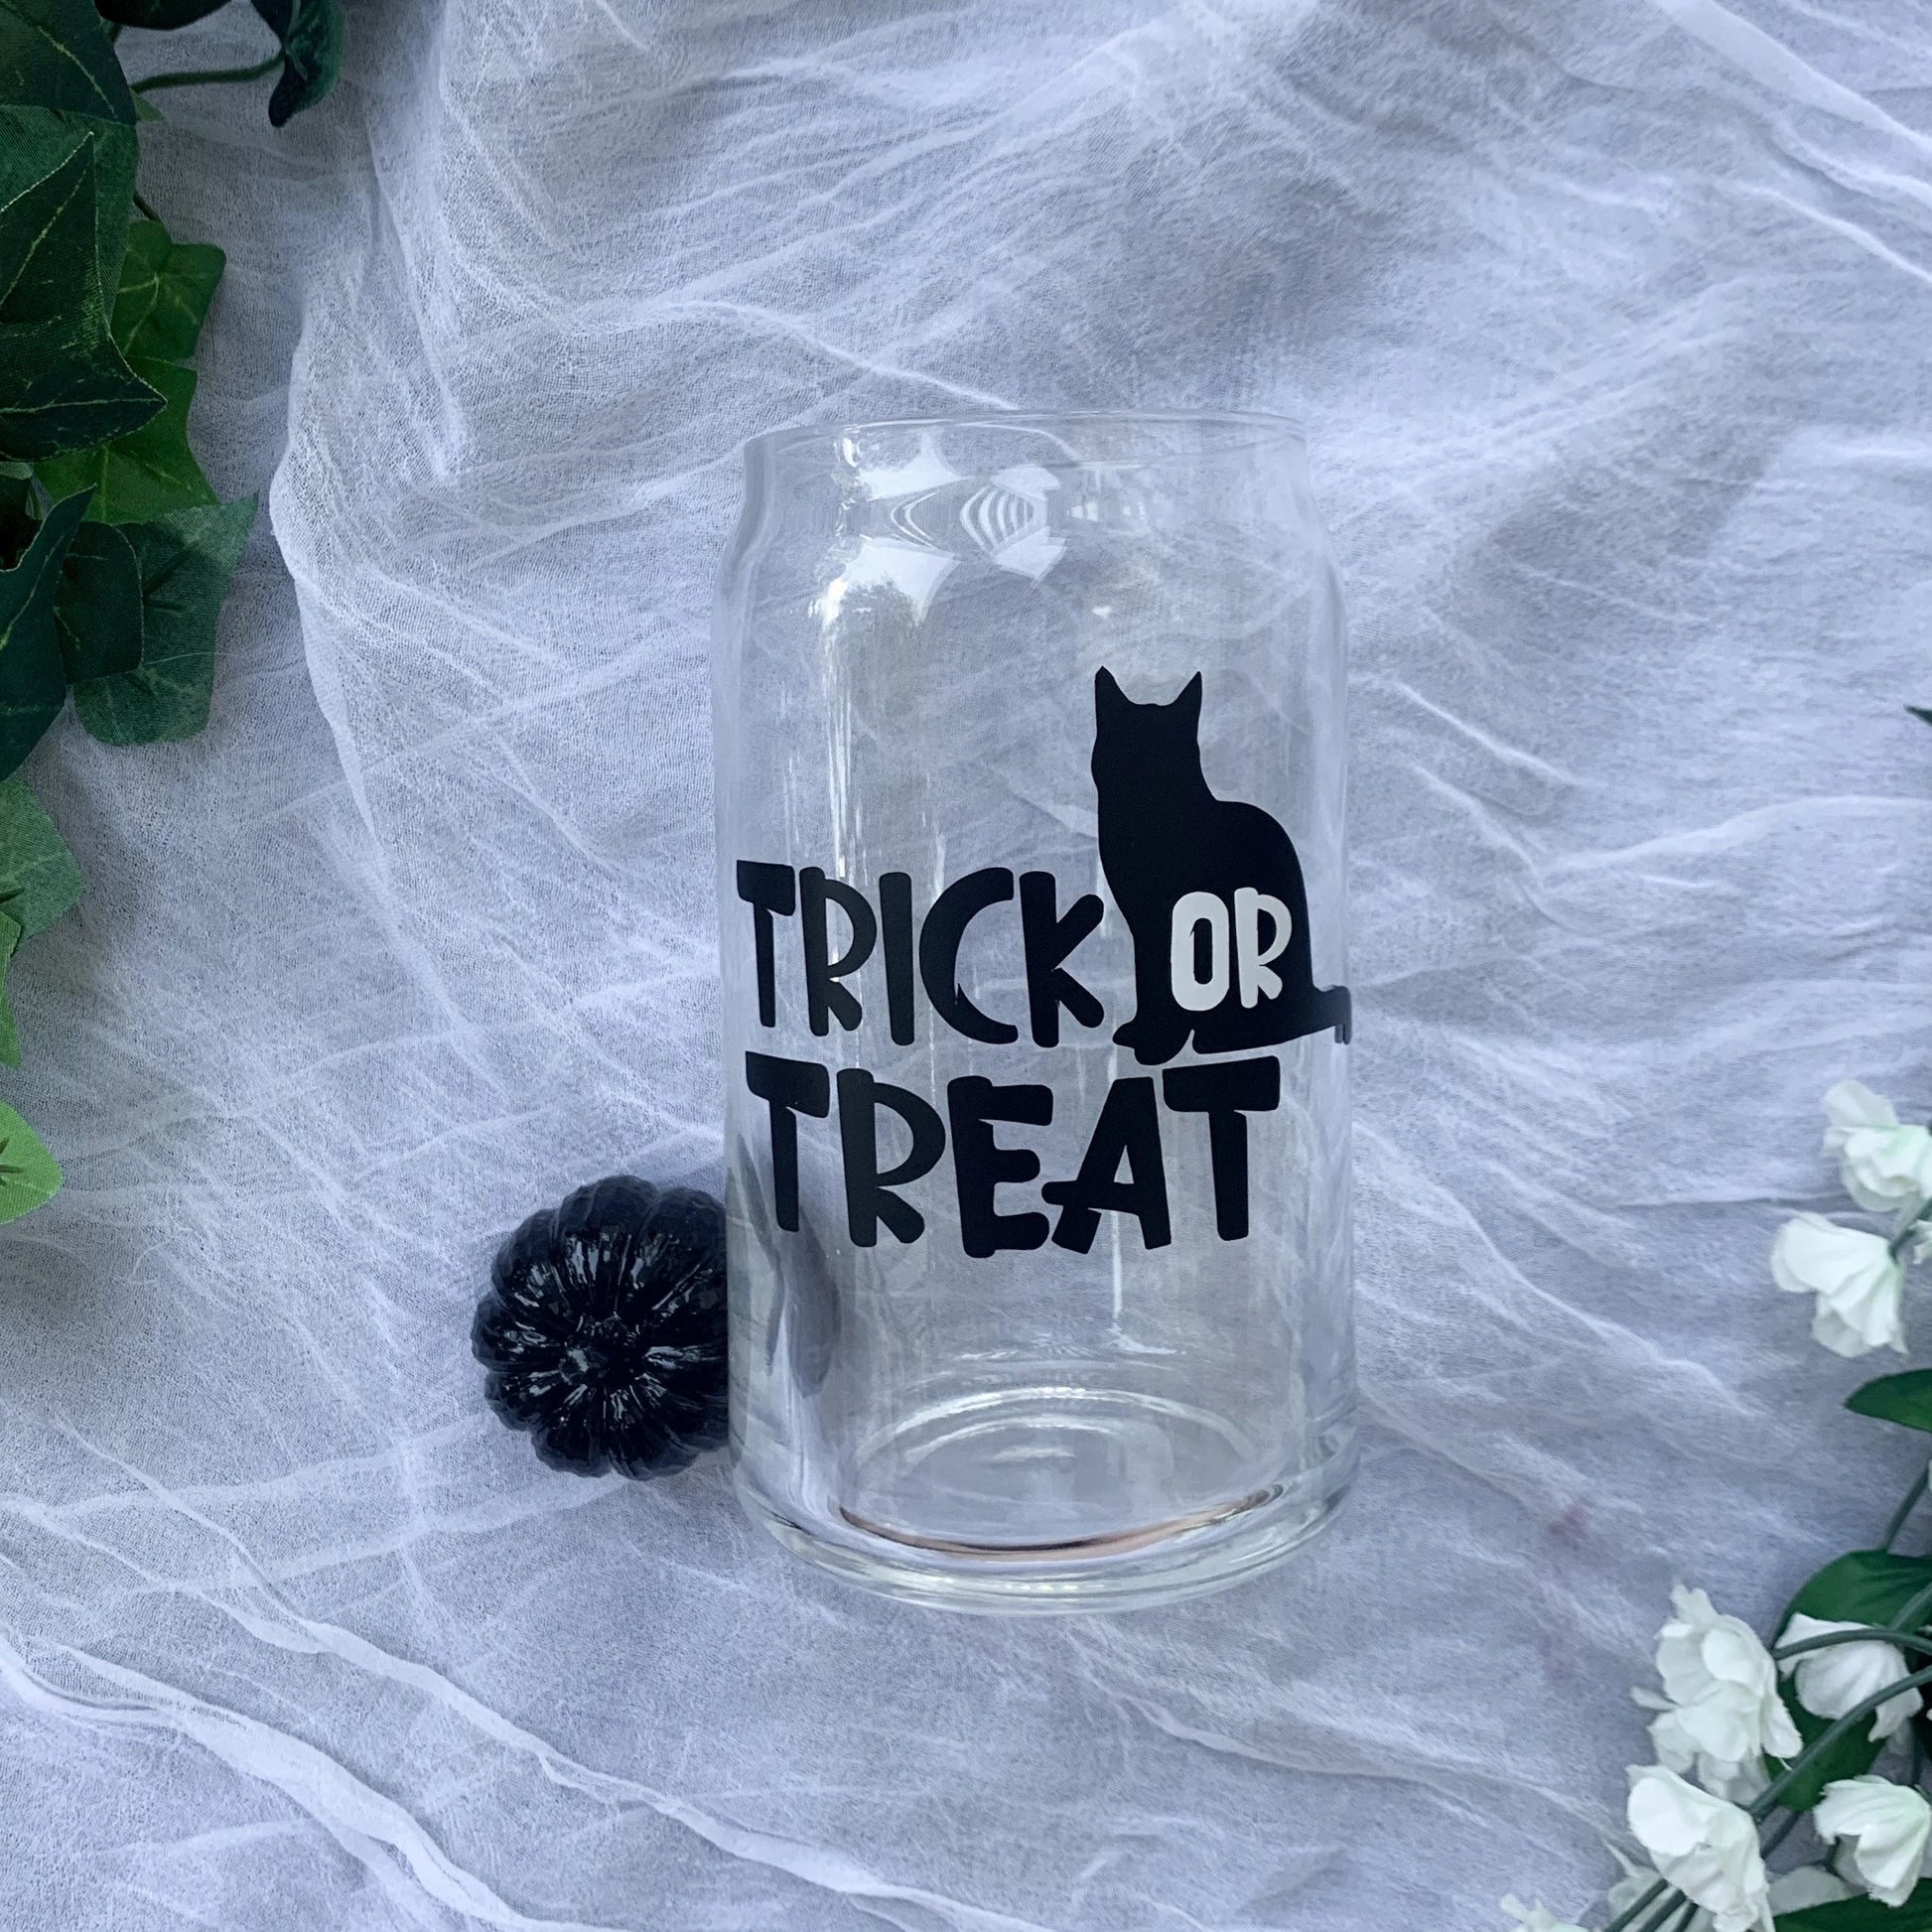 Clear glass cup with black trick or treat lettering with black cat design .